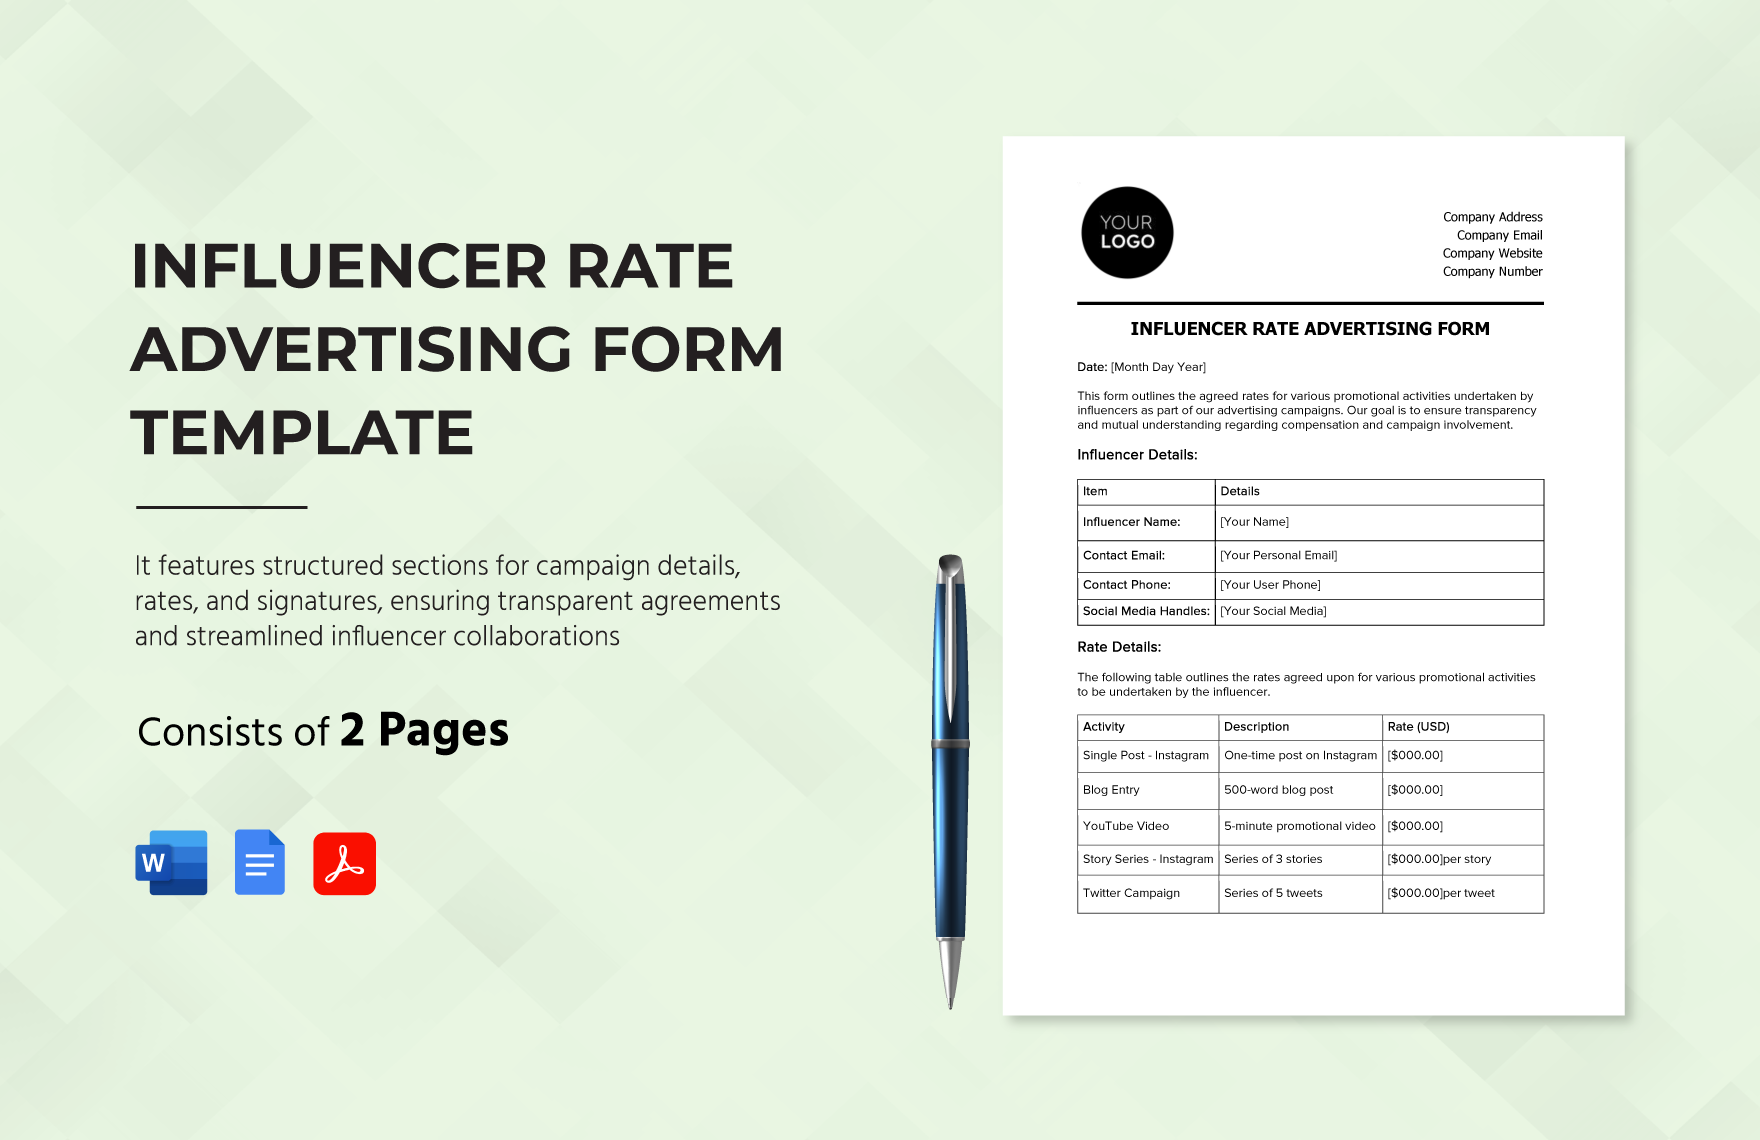 Influencer Rate Advertising Form Template in Word, Google Docs, PDF